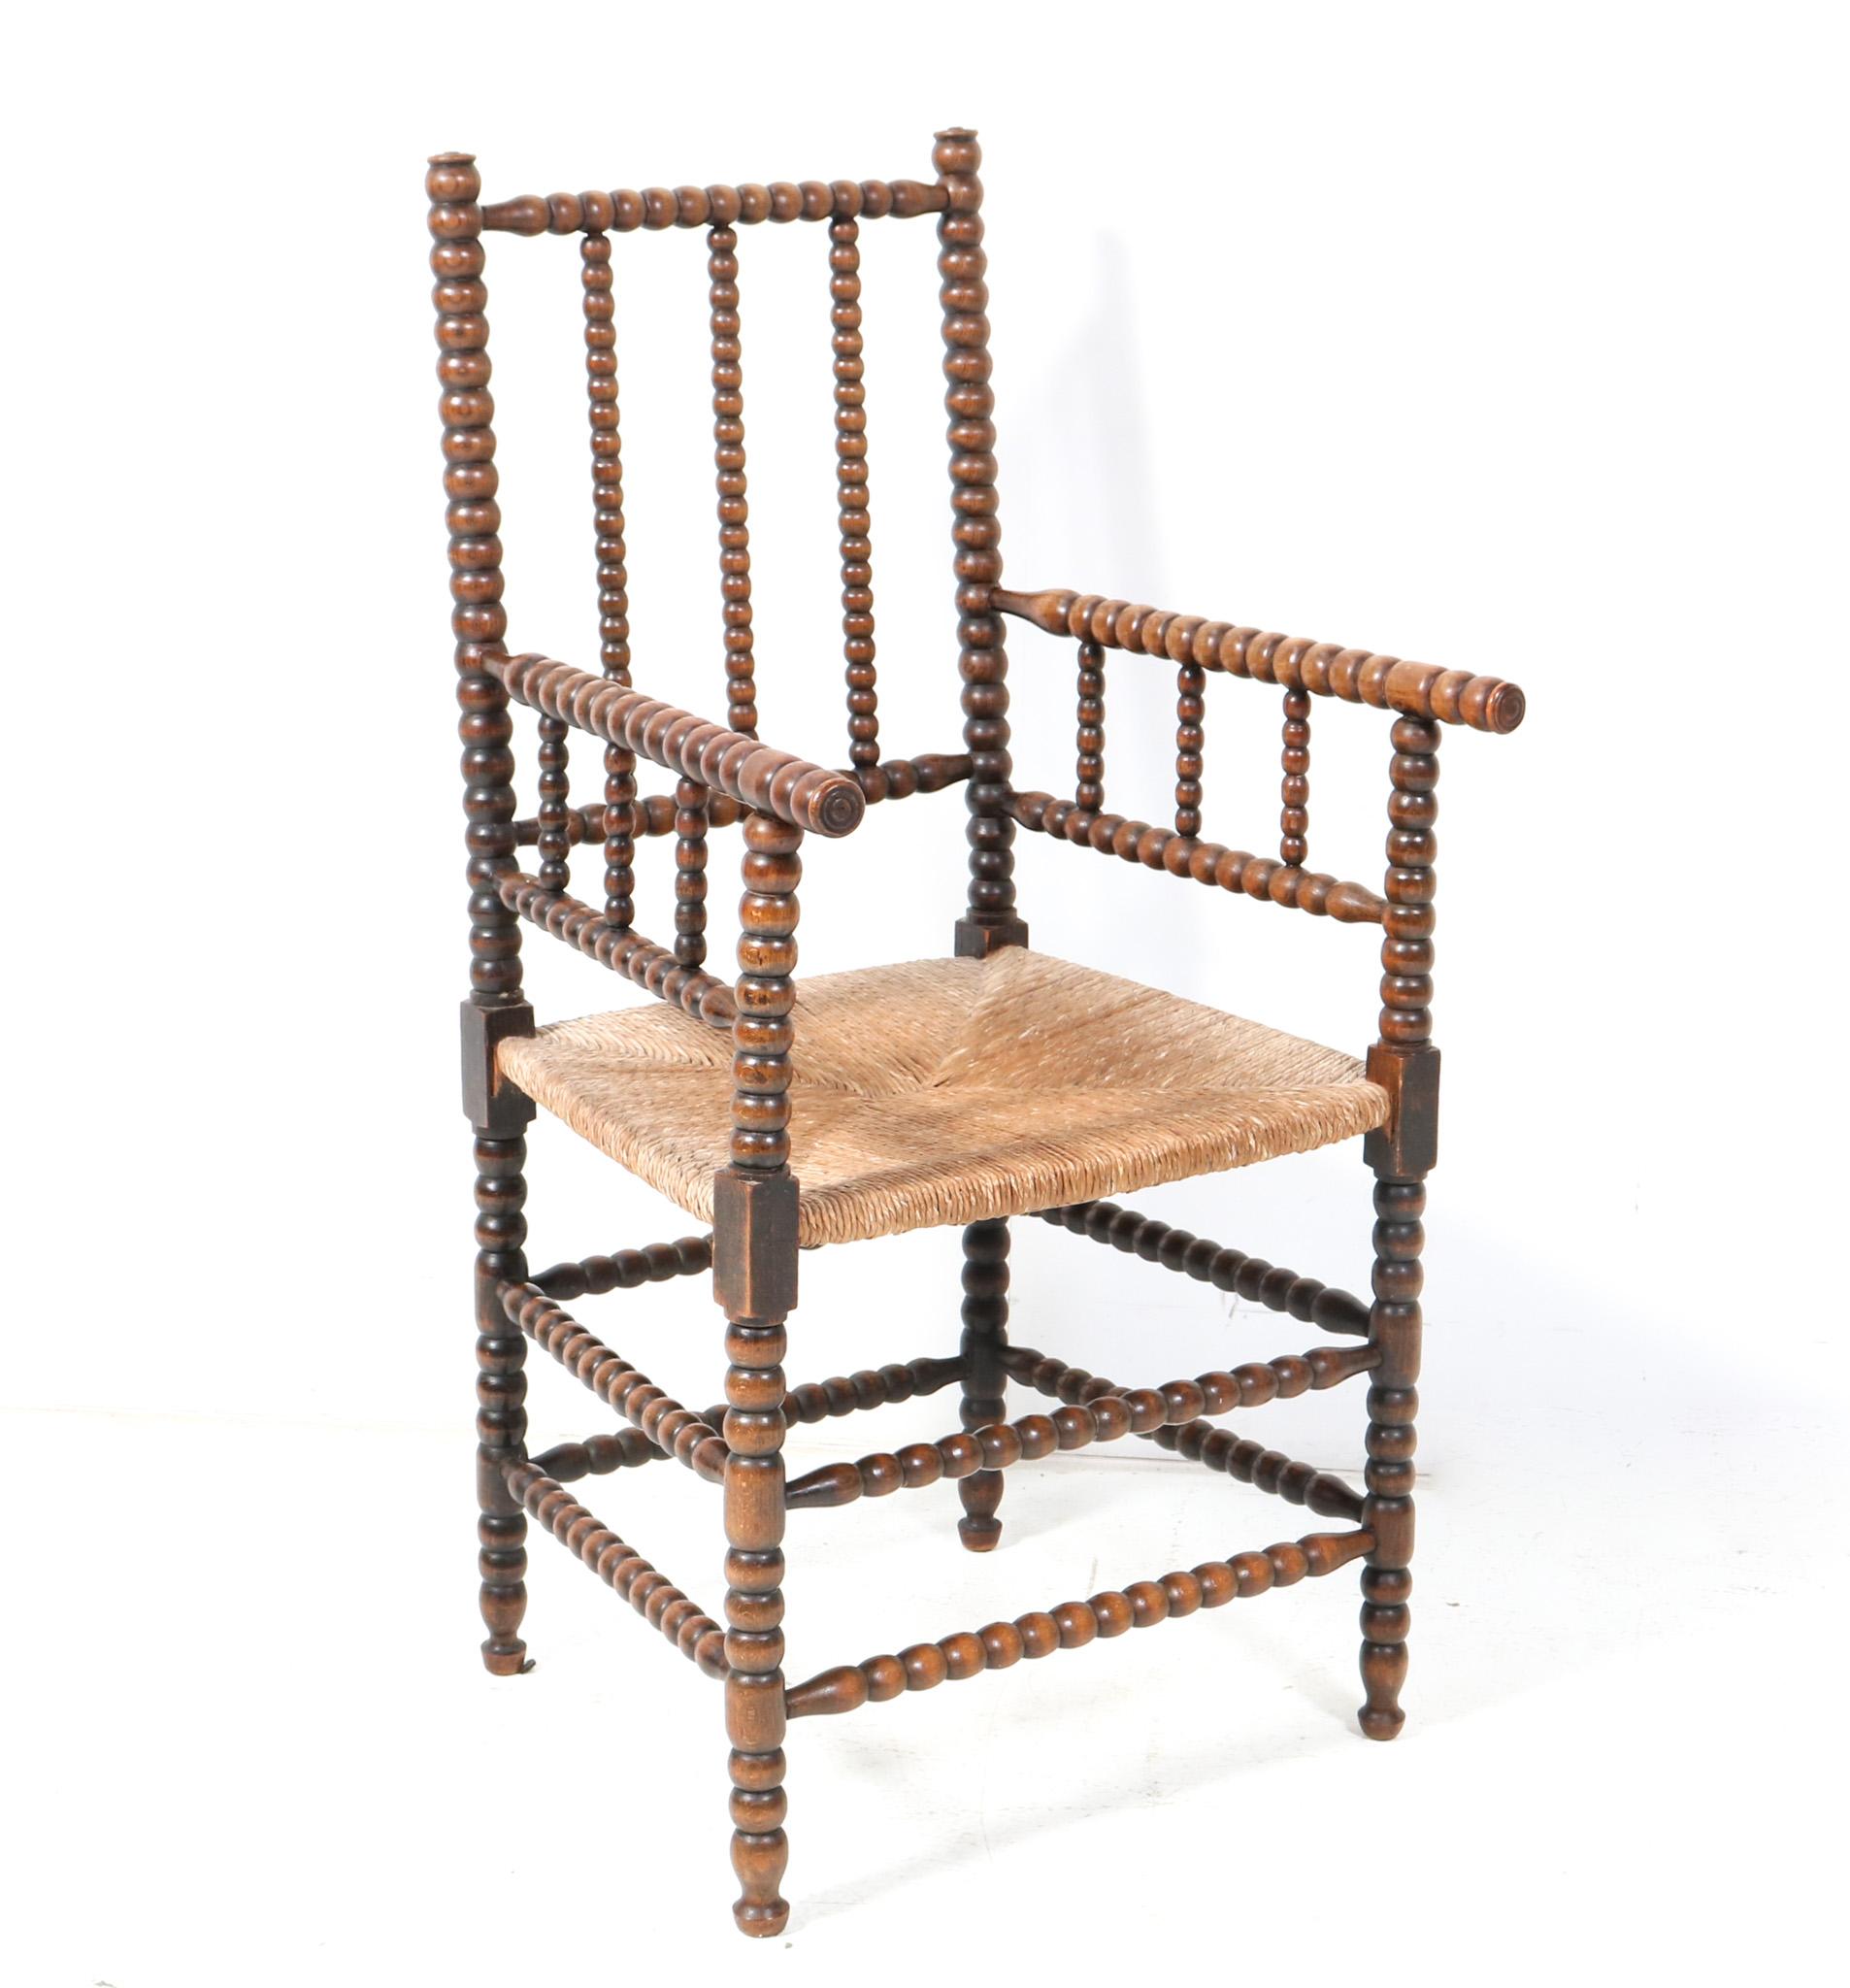 Stunning and rare Jacobean style bobbin armchair.
Striking Dutch design from the 1900s.
Solid hand-crafted stained beech frame with bobbin turned back, legs and supports.
Original woven rush seat.
This wonderful Jacobean style bobbin armchair is in